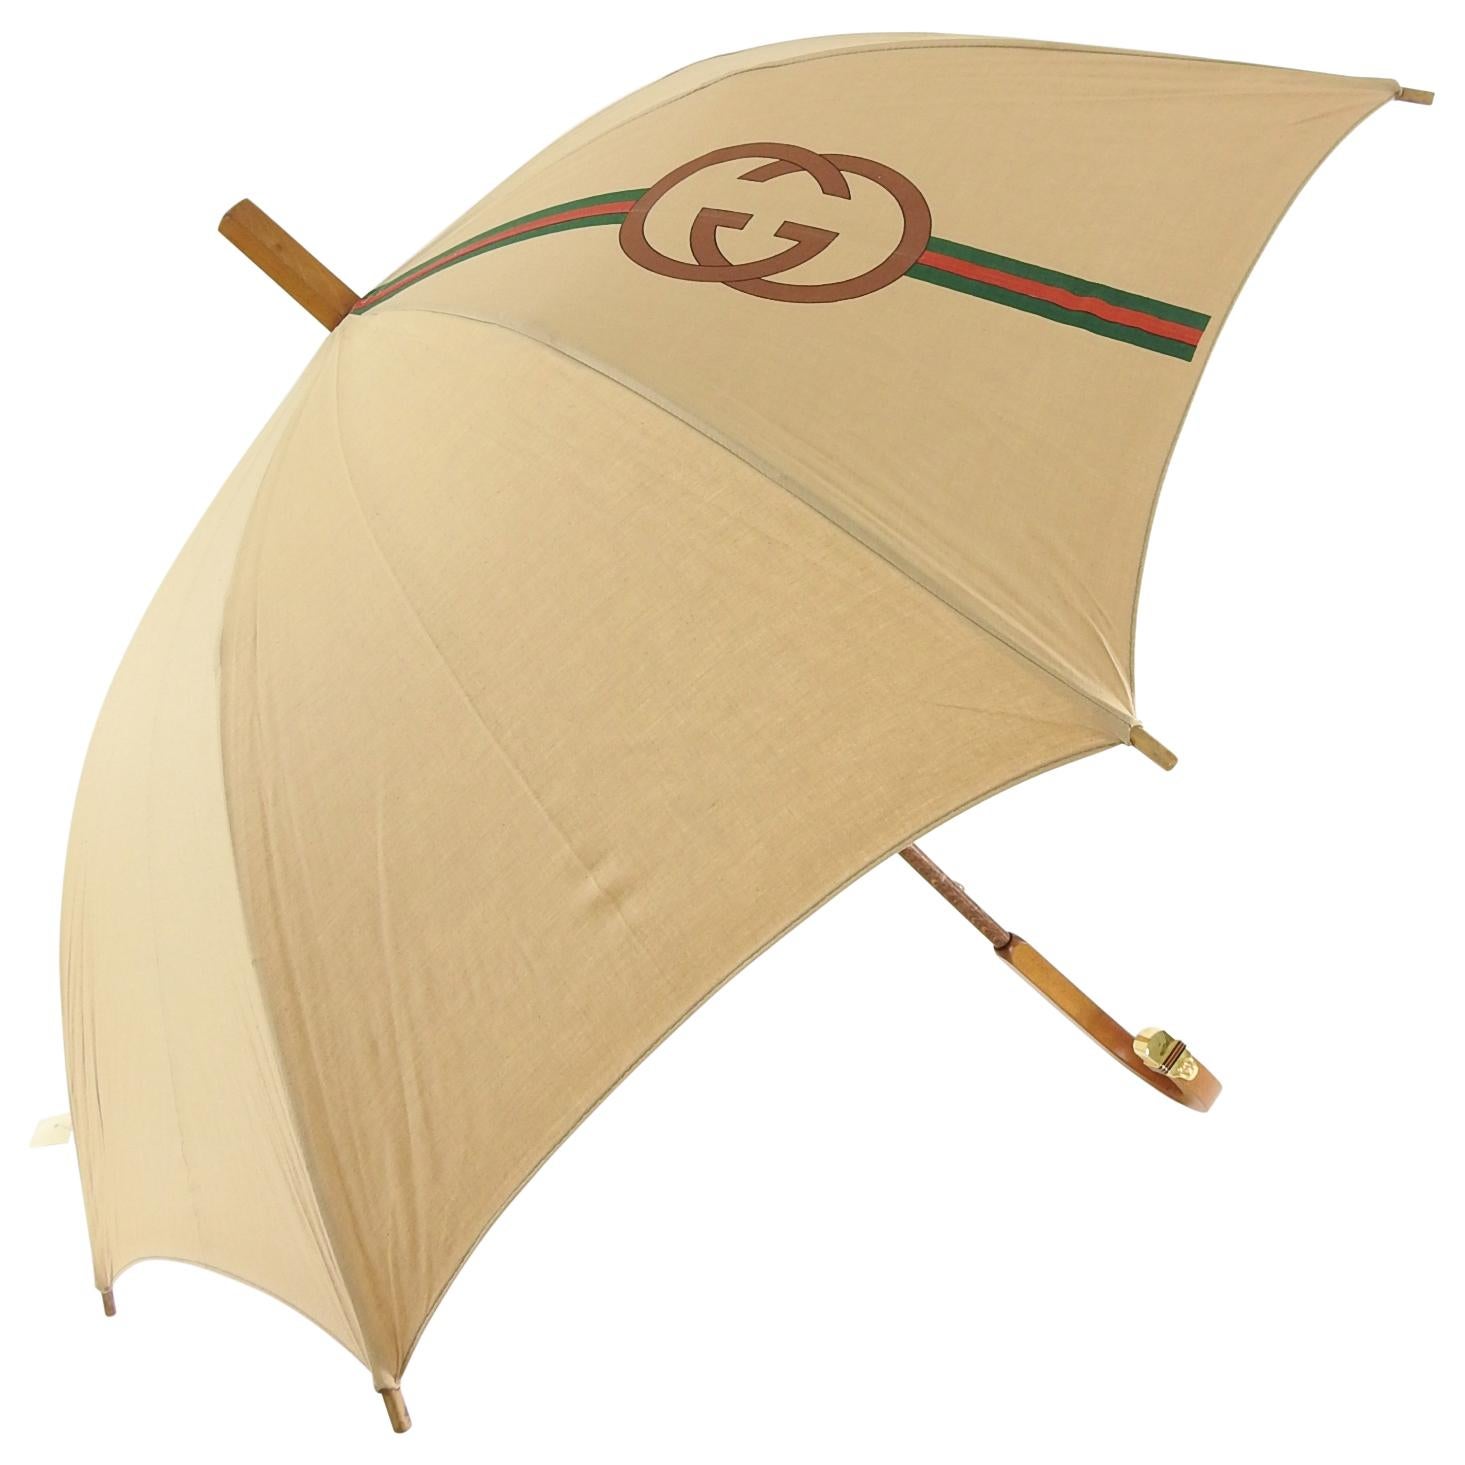 Gucci Vintage 1981 GG Logo Wood Handle Umbrella in box - New with Tags 2